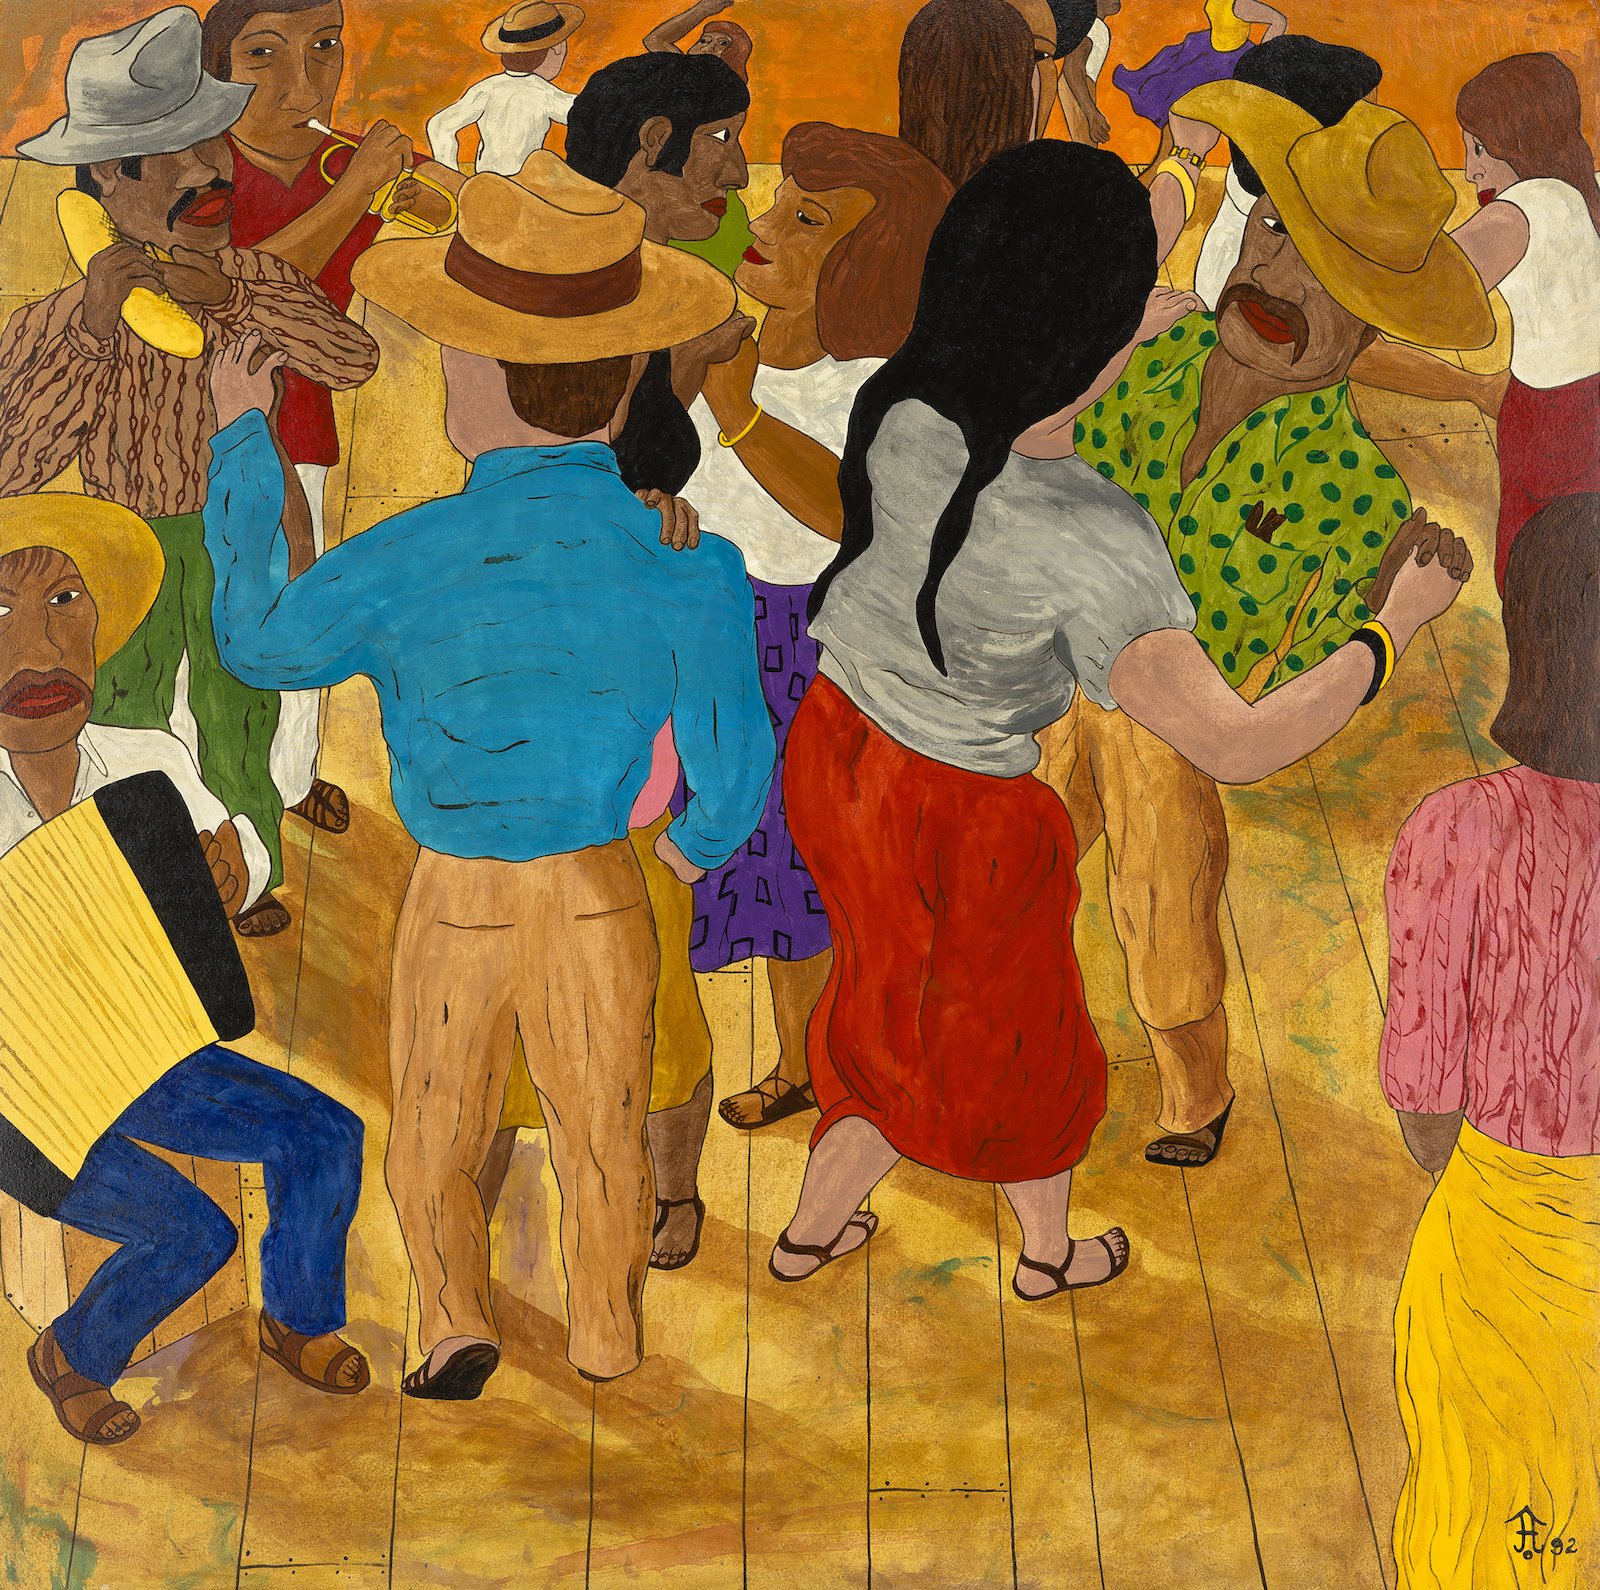 Scene of couples dancing at a country dance with musicians on the left in various color.